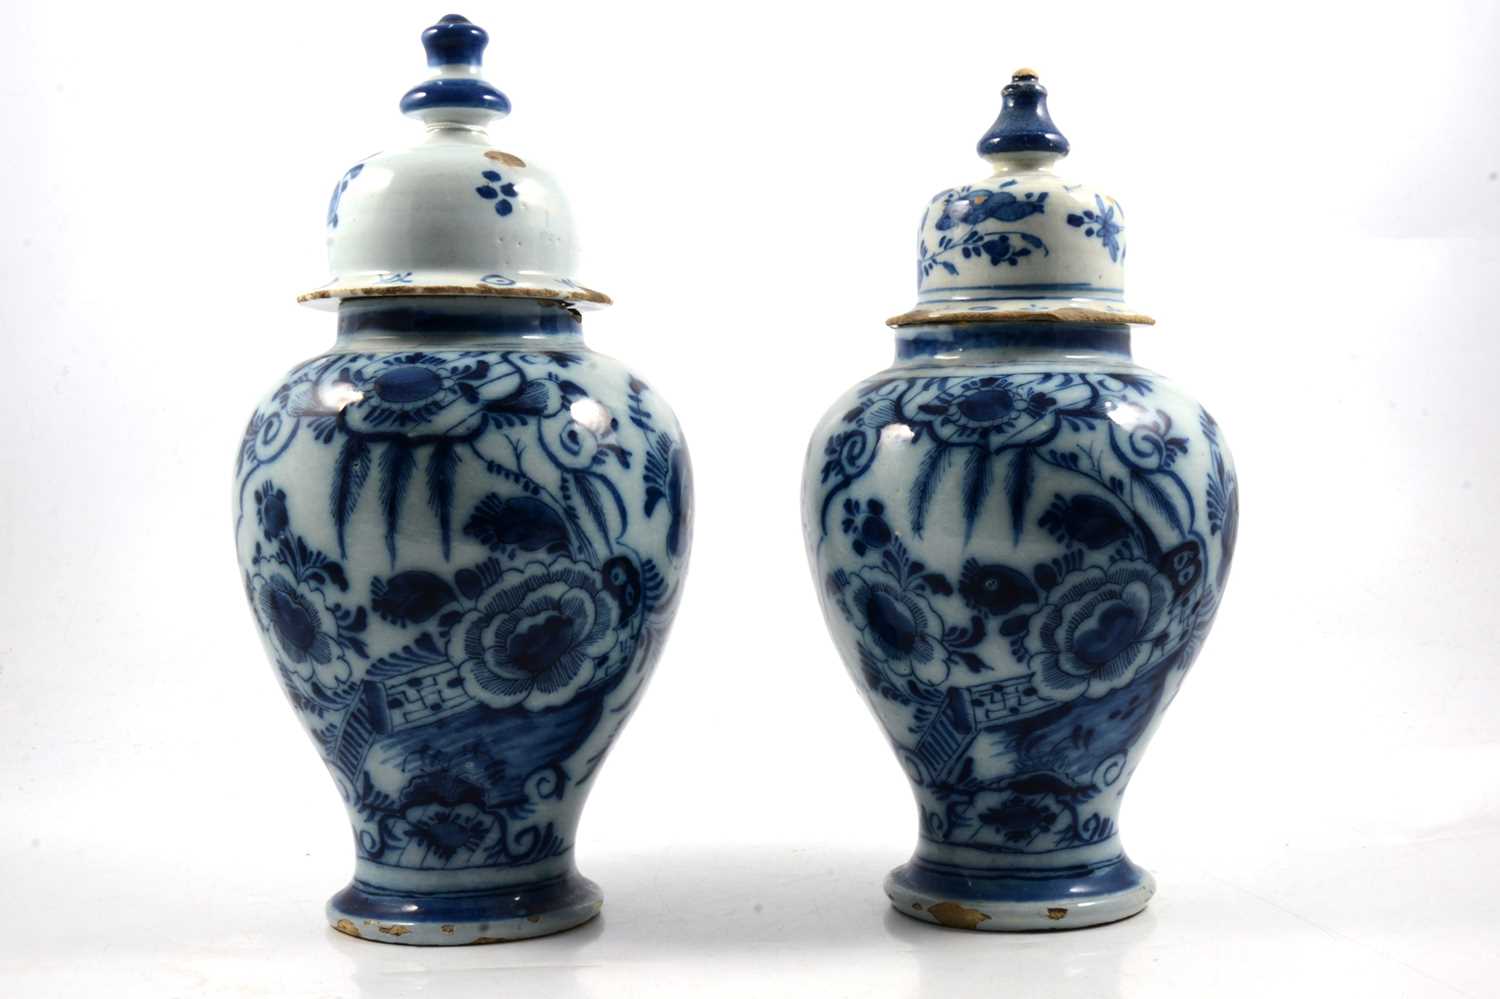 Lot 42 - Two Delft vases with Chinoiserie decoration.